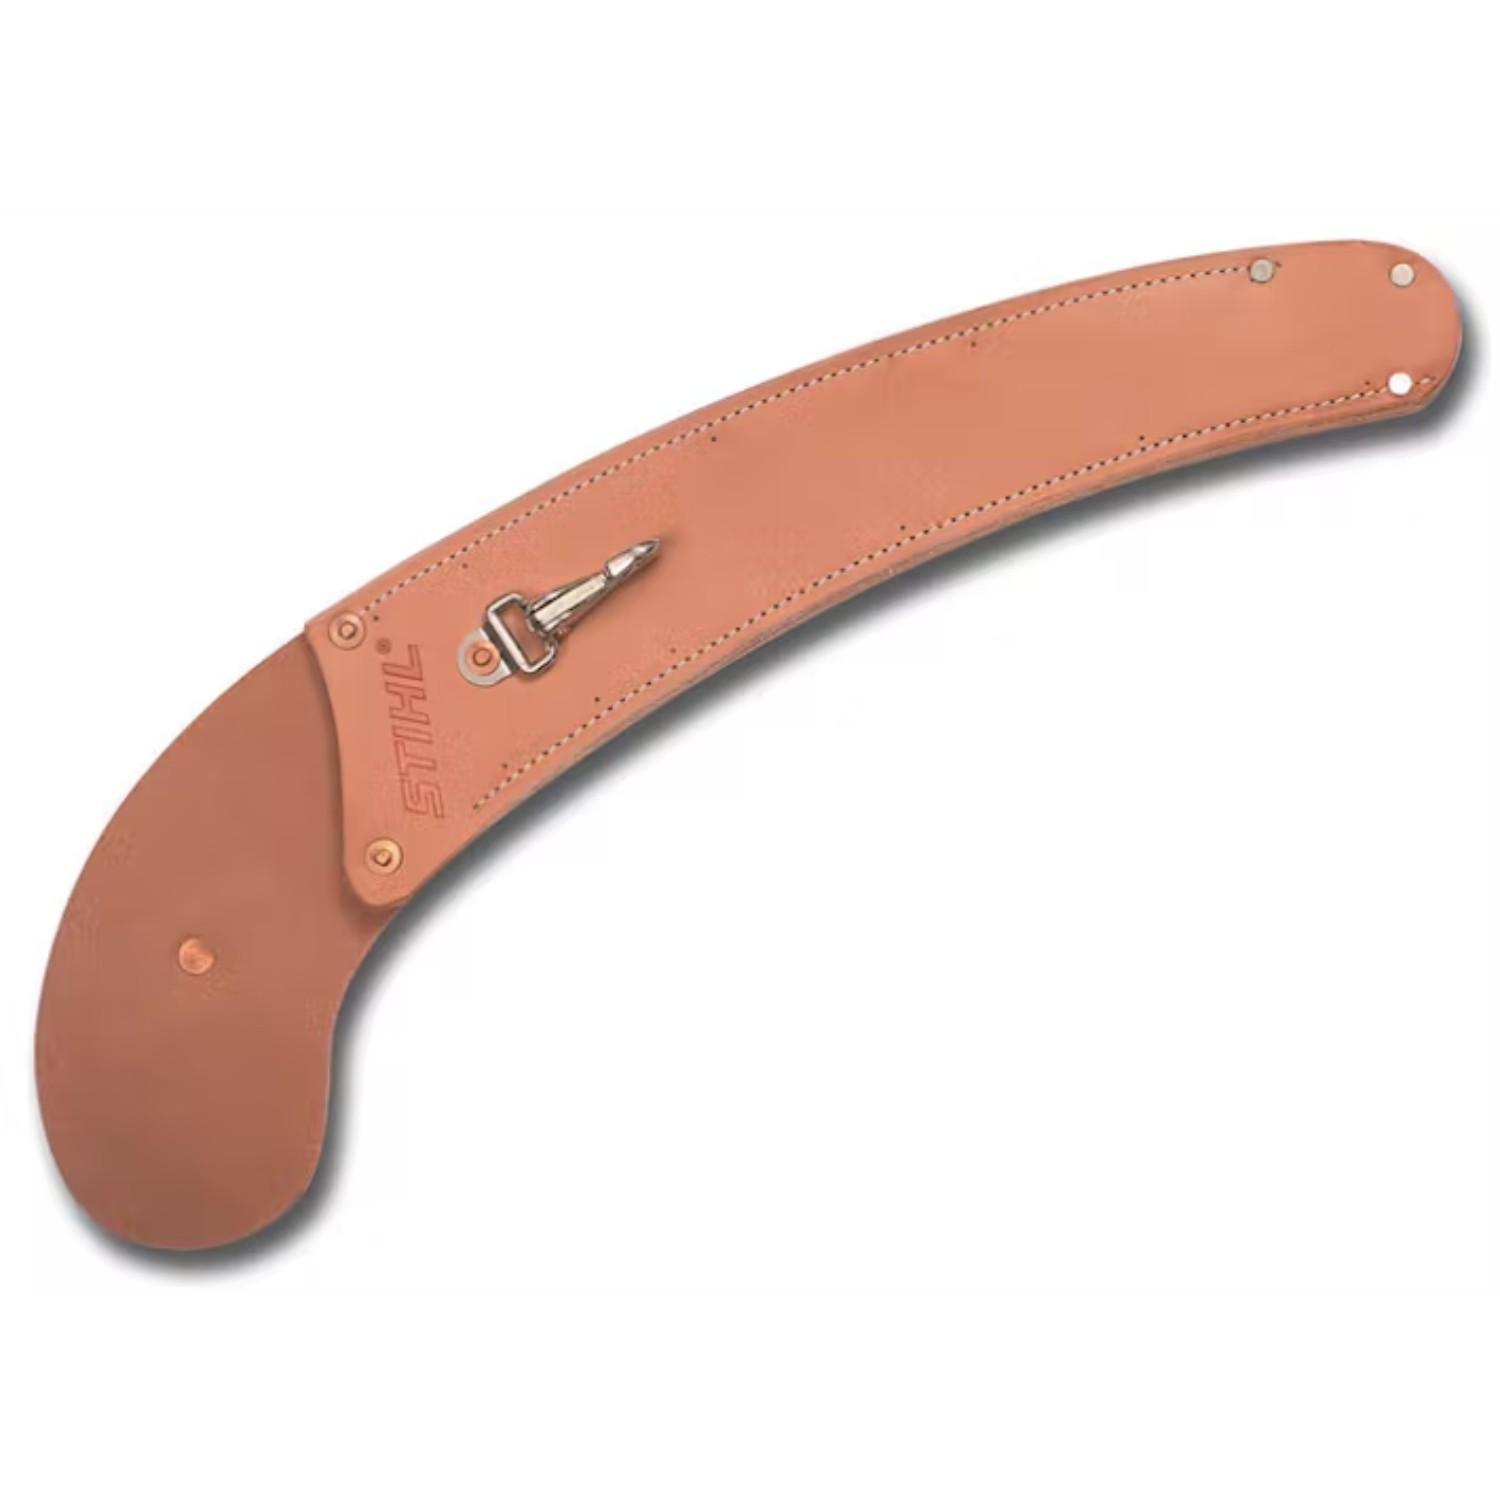 Stihl Leather Sheath for PS 70 Arboriculture Pruning Saw